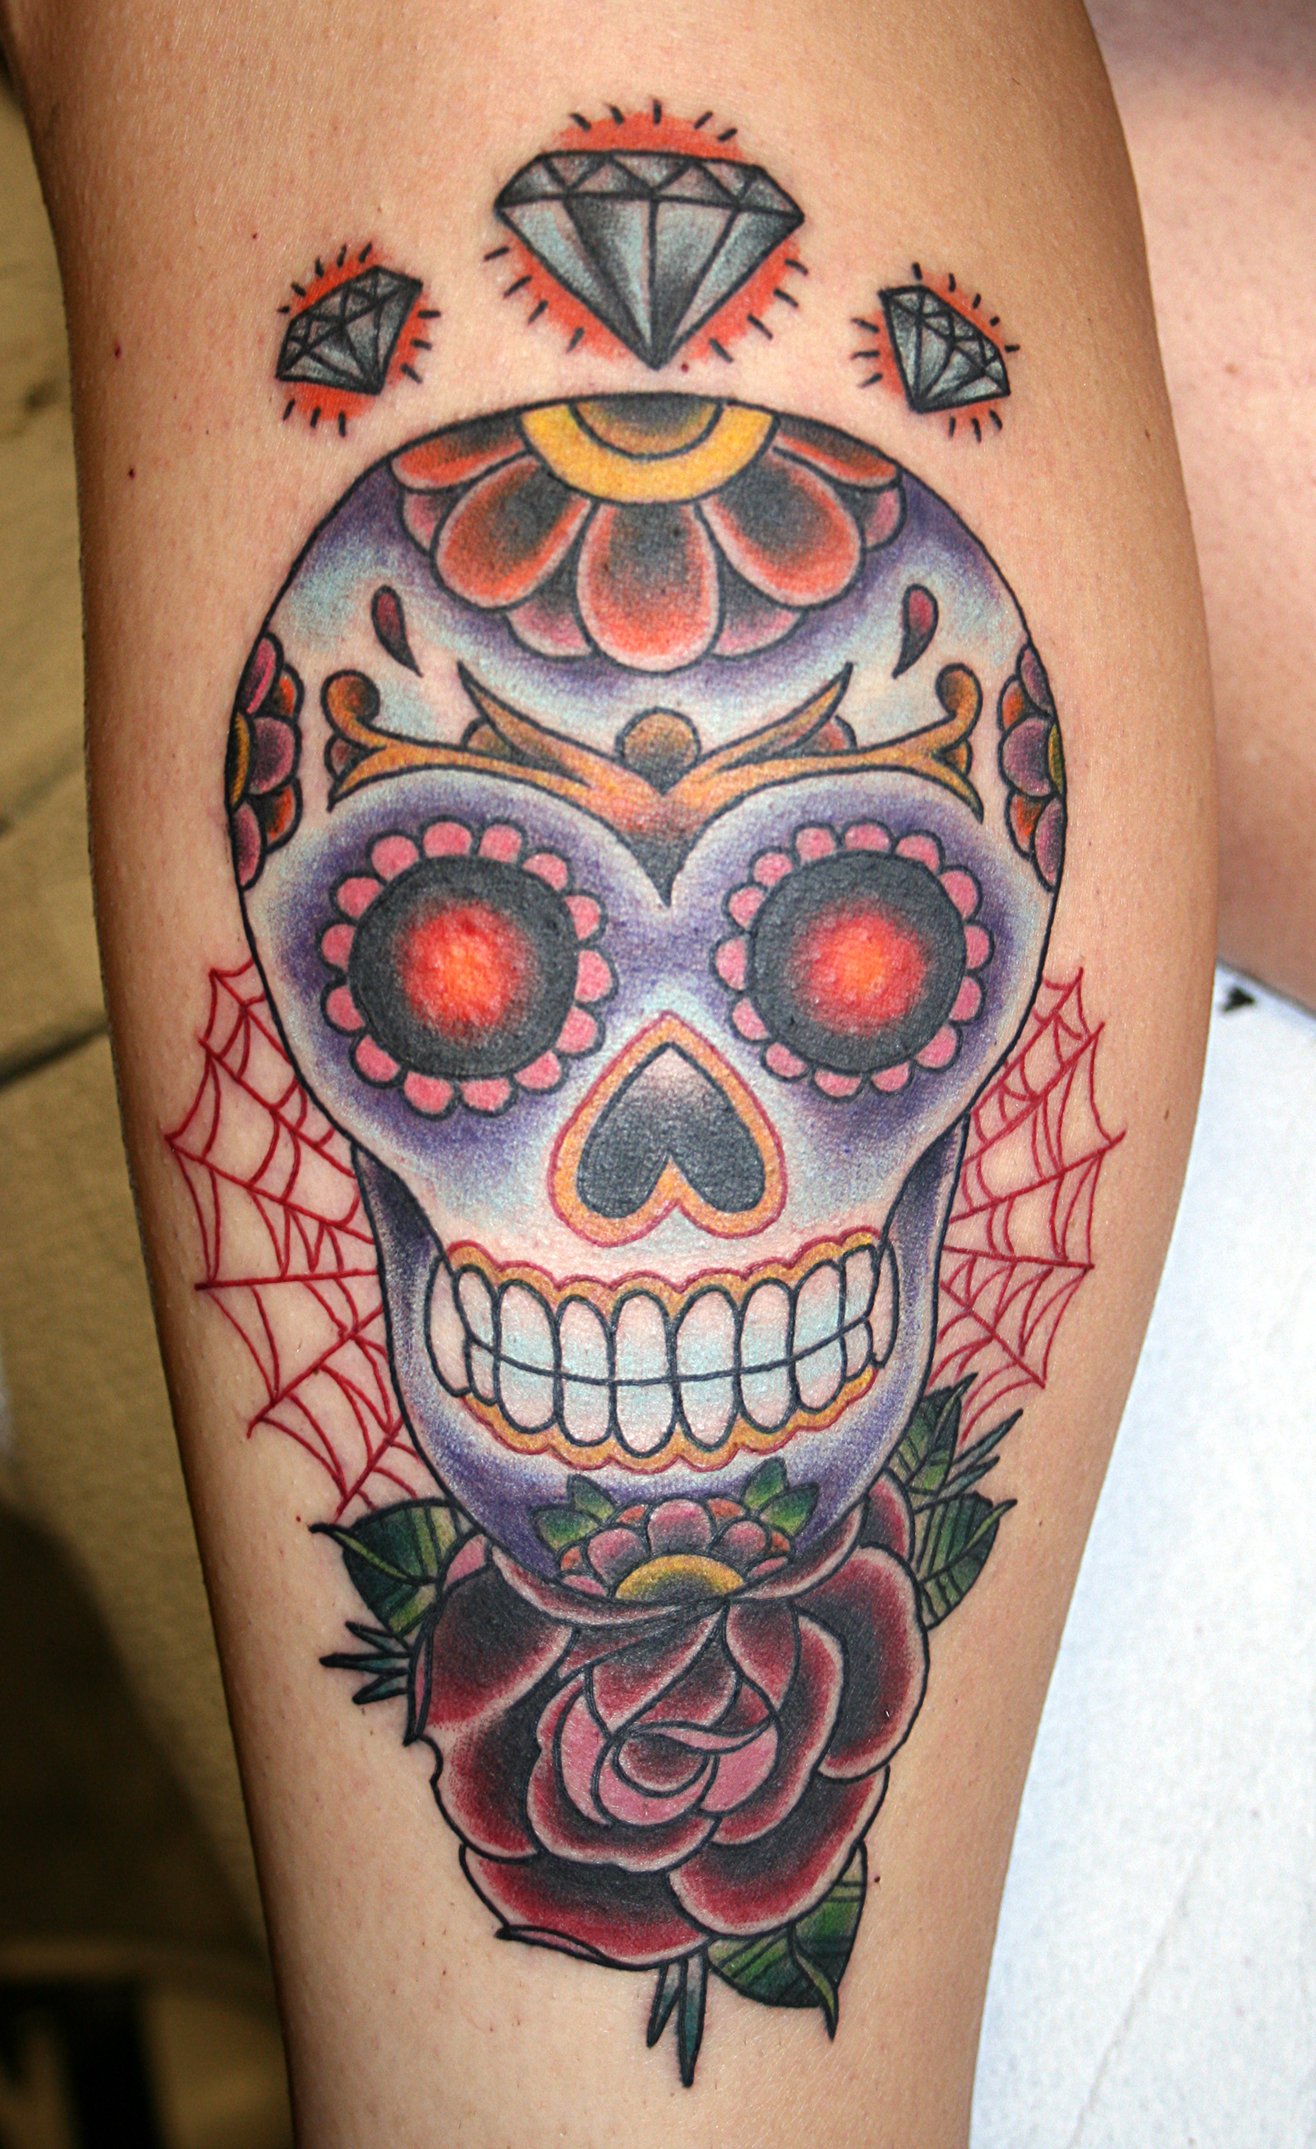 Skull Tattoos Designs Ideas And Meaning Tattoos For You inside measurements 1316 X 2149